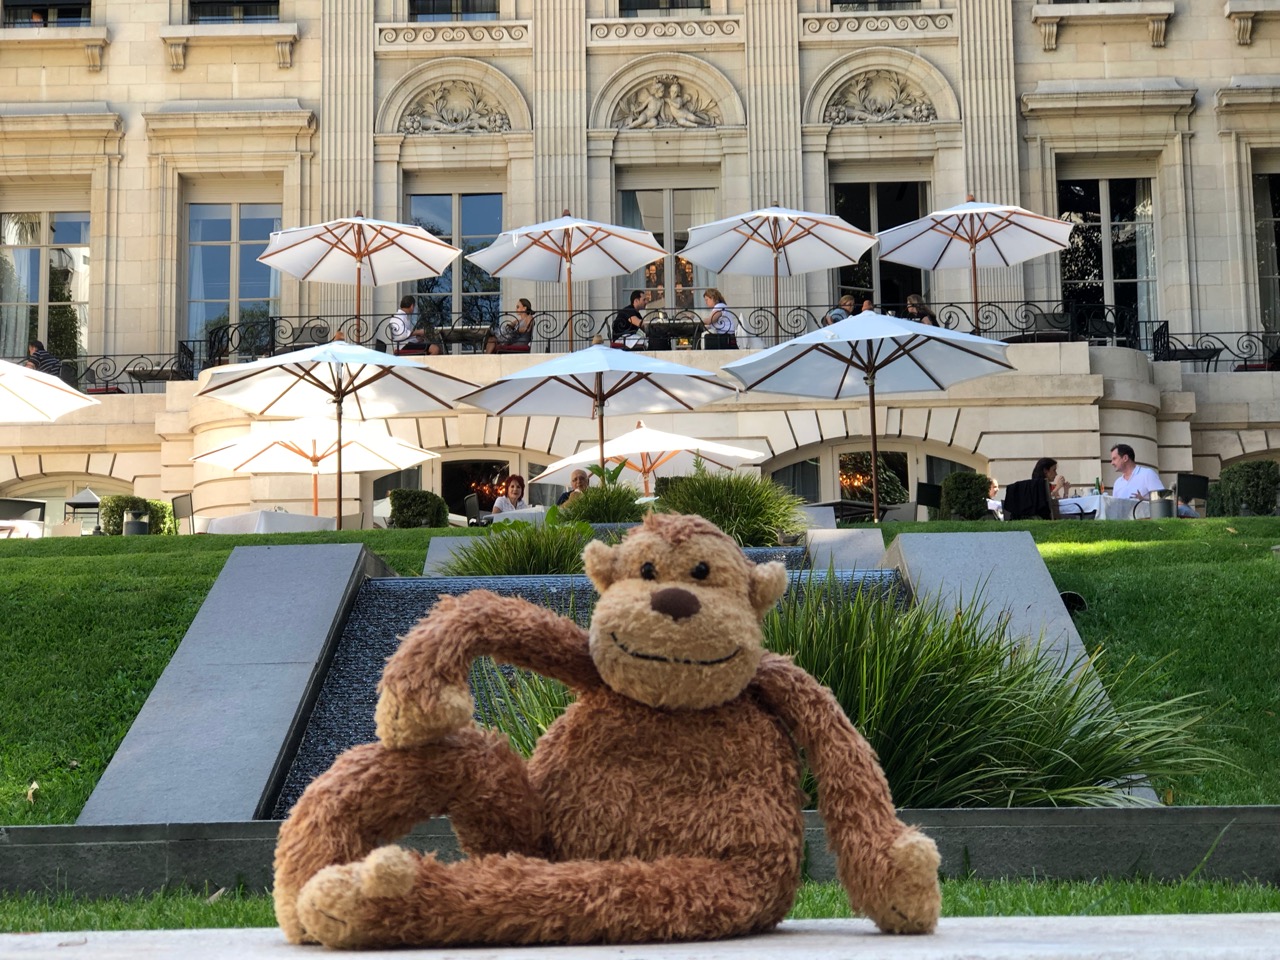 a stuffed monkey sitting on a stone ledge in front of a building with white umbrellas